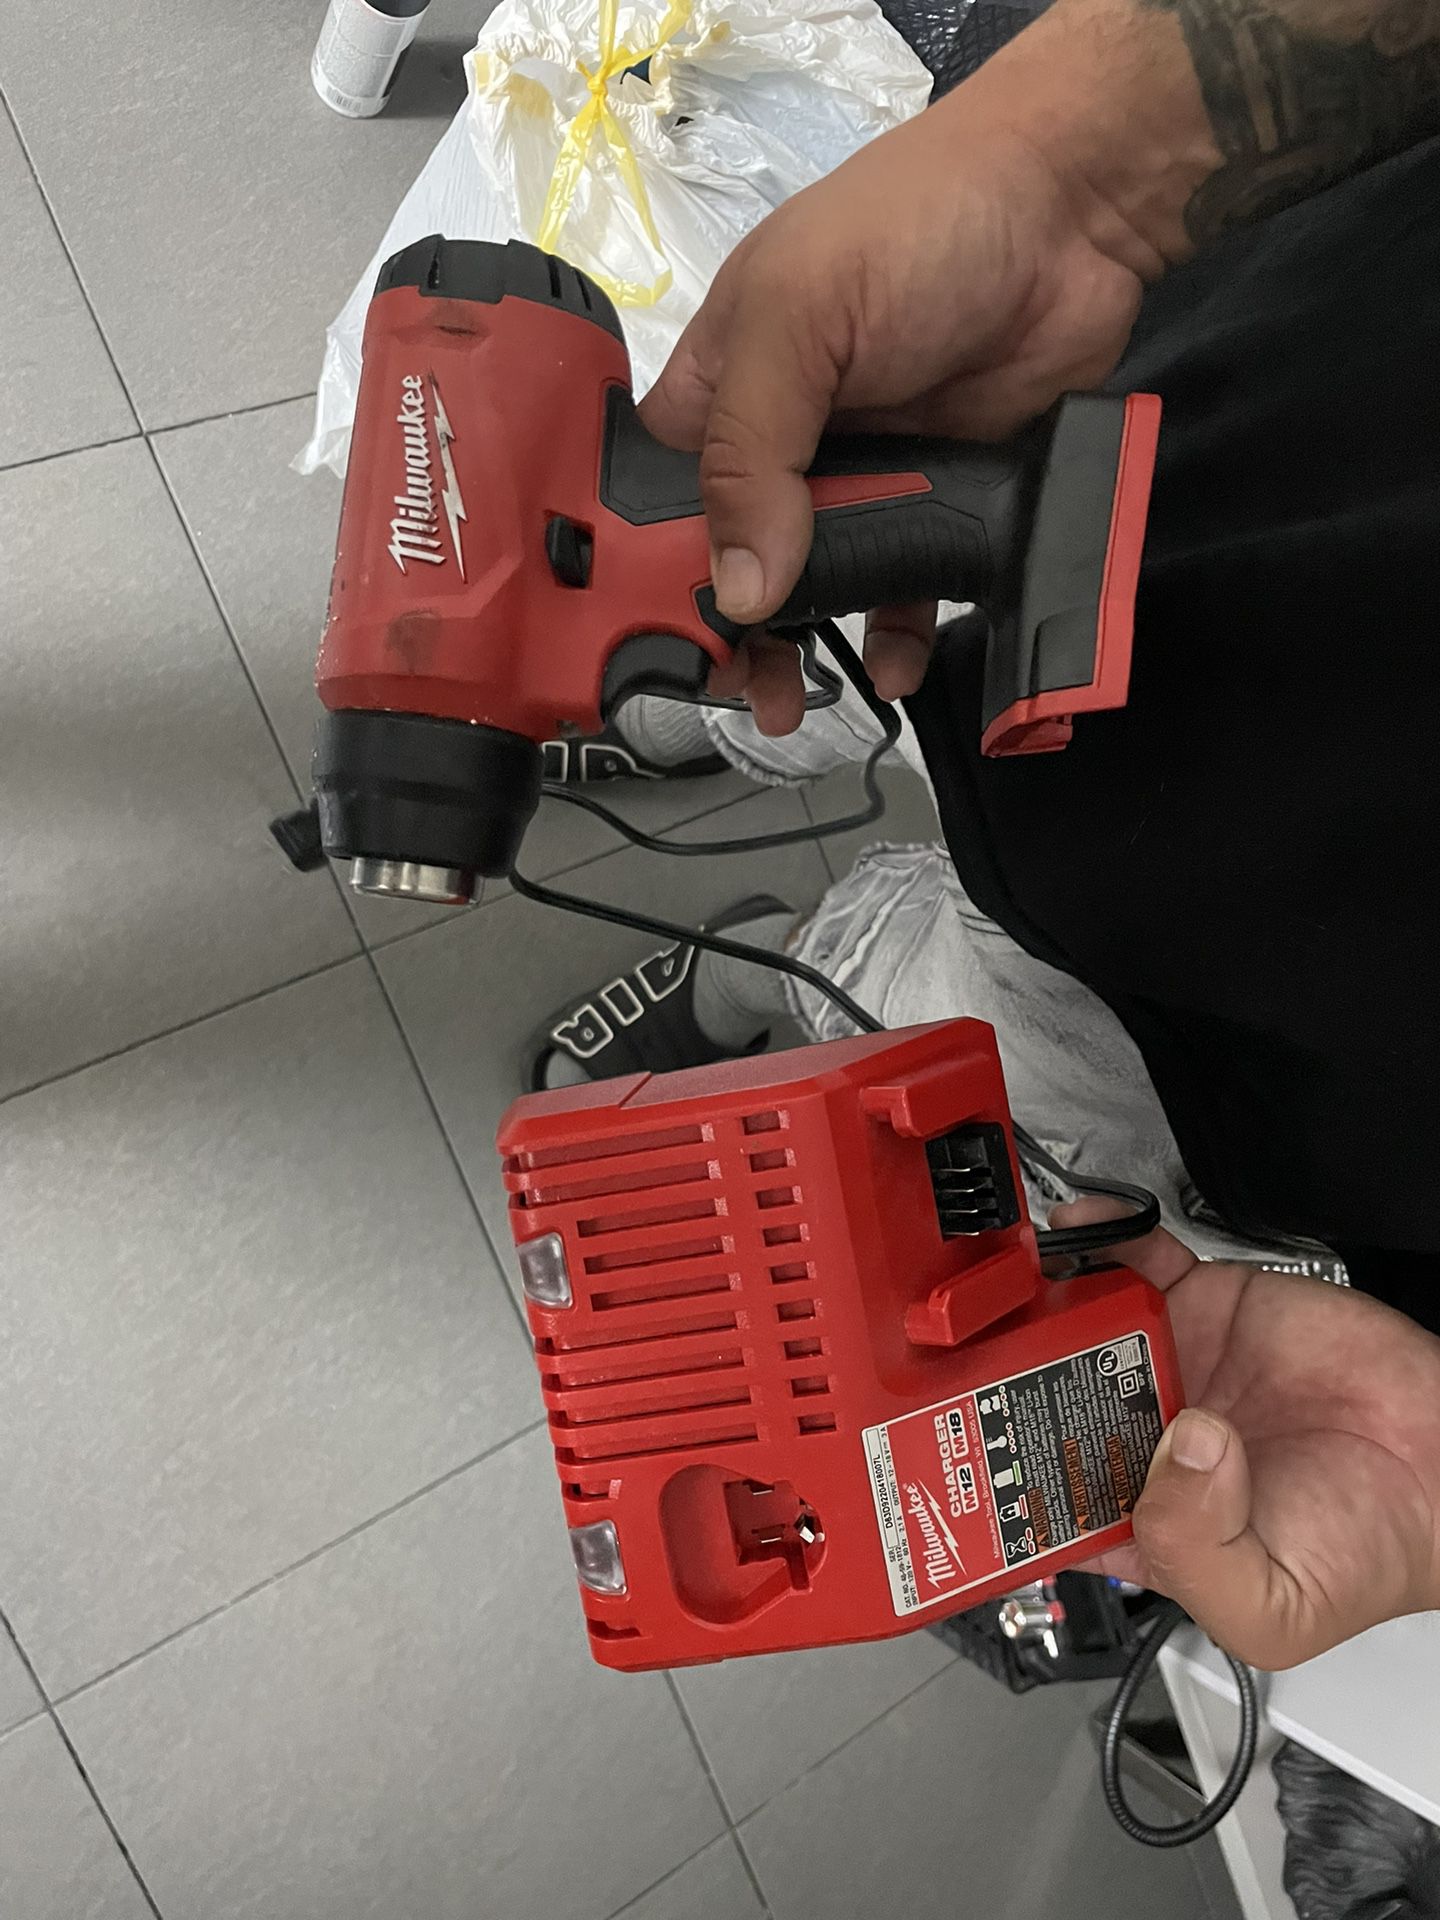 Heat Gun With Charger